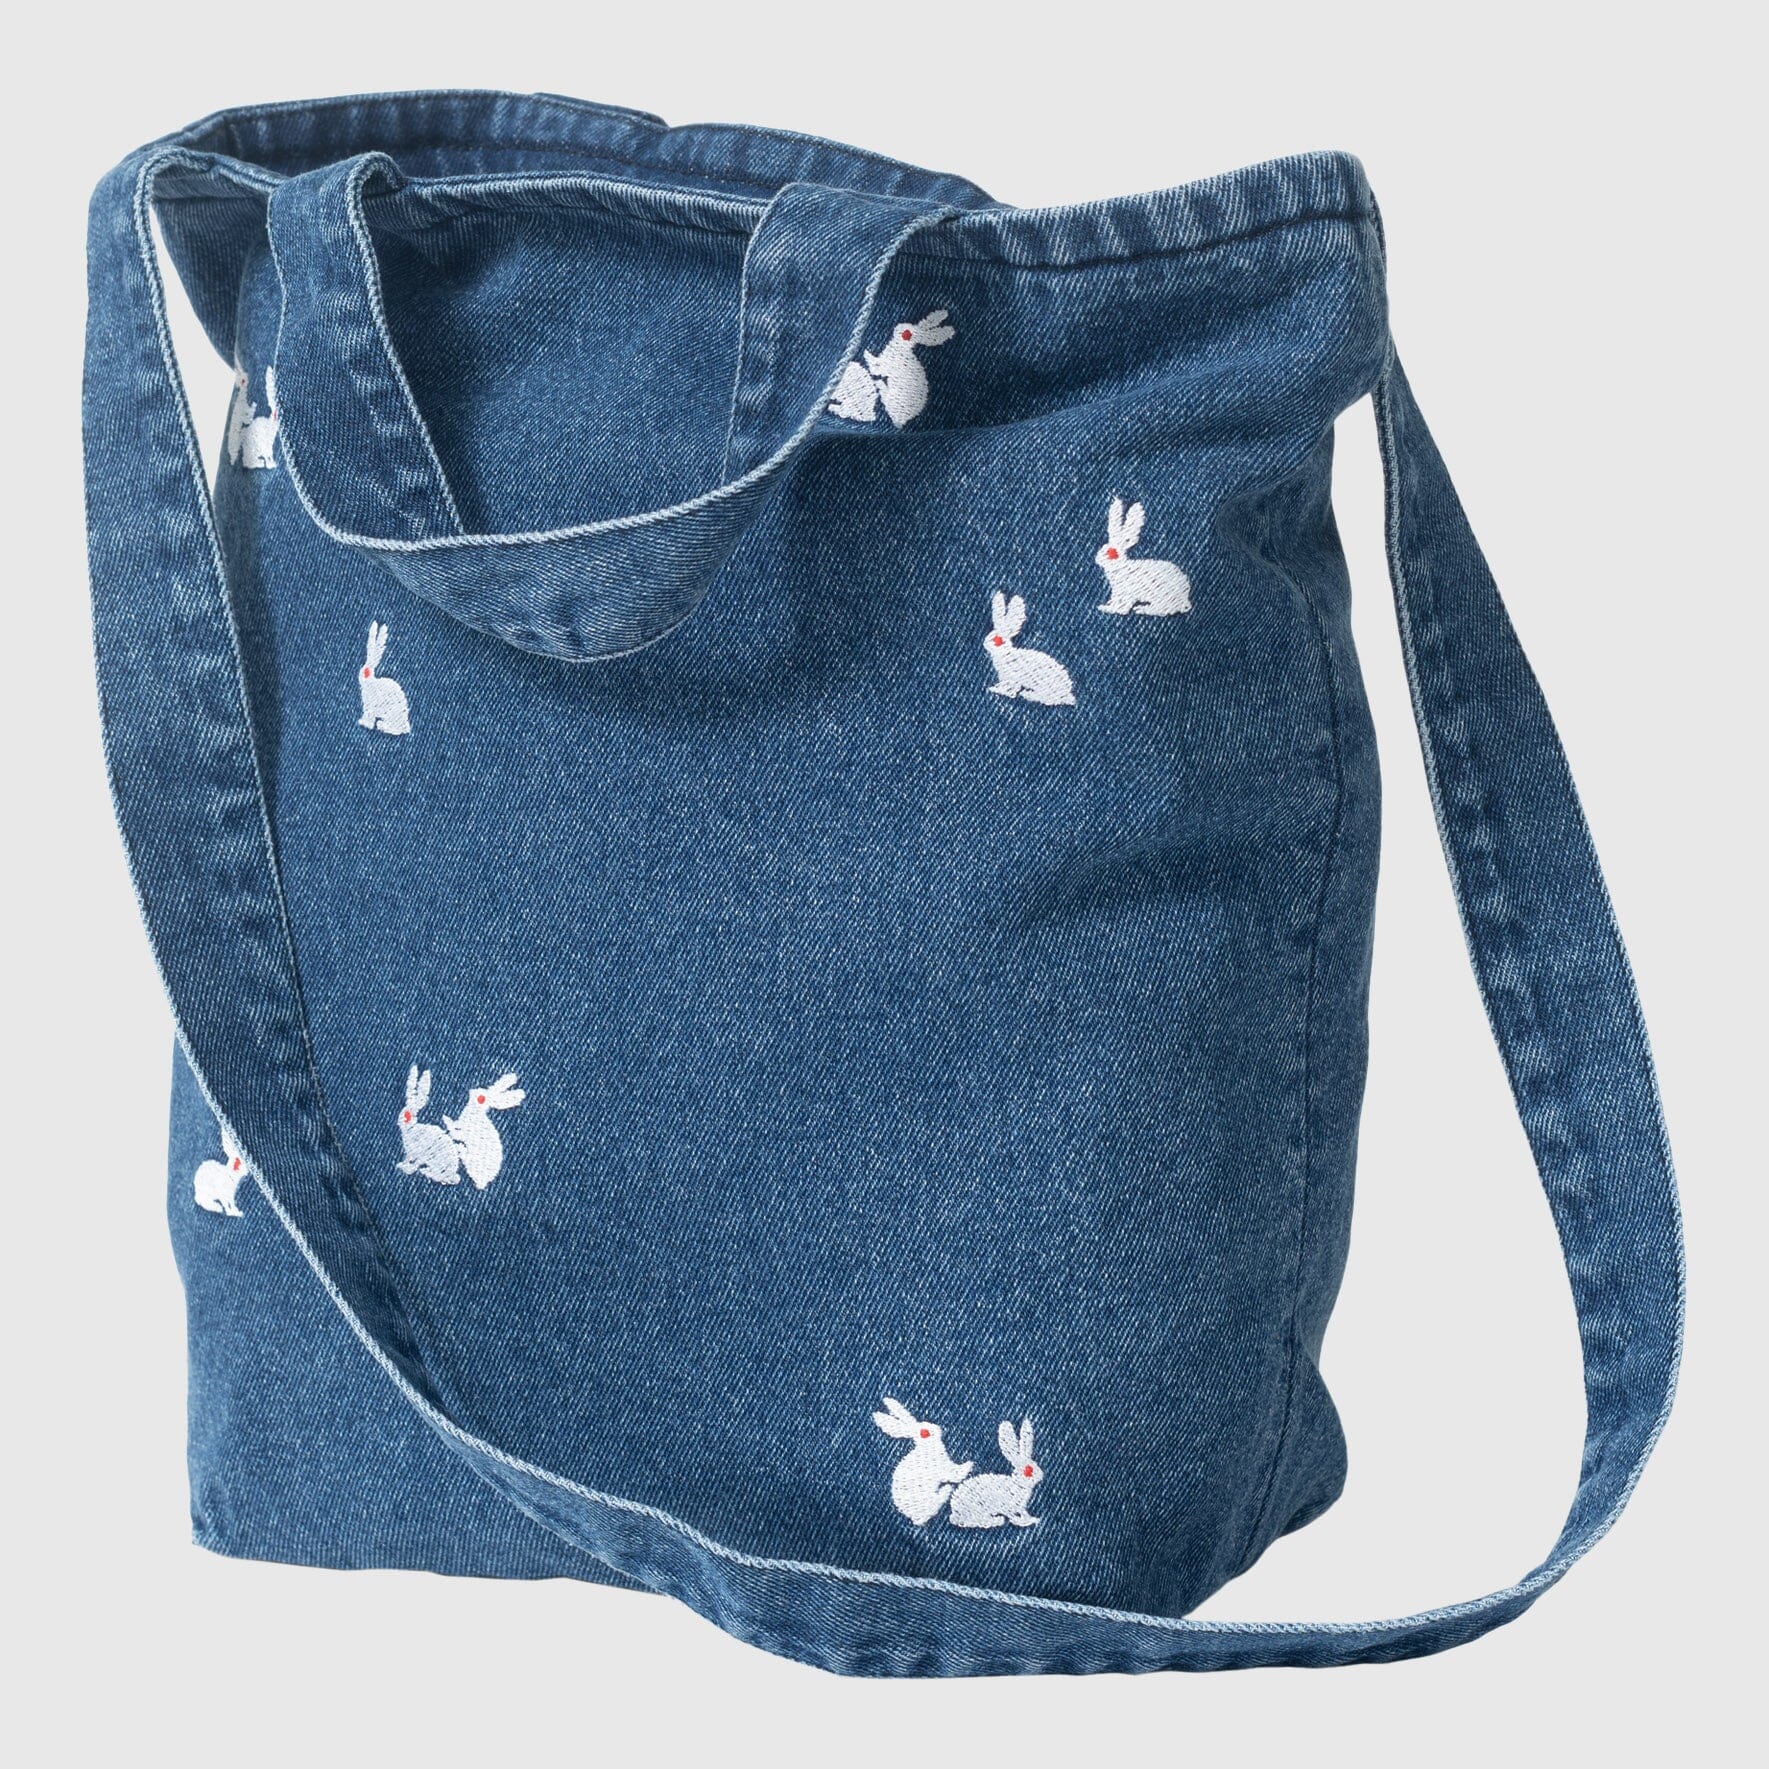 Carne Bollente Bags Bunny Tote Bag - Washed Blue Tote Bag Carne Bollente 